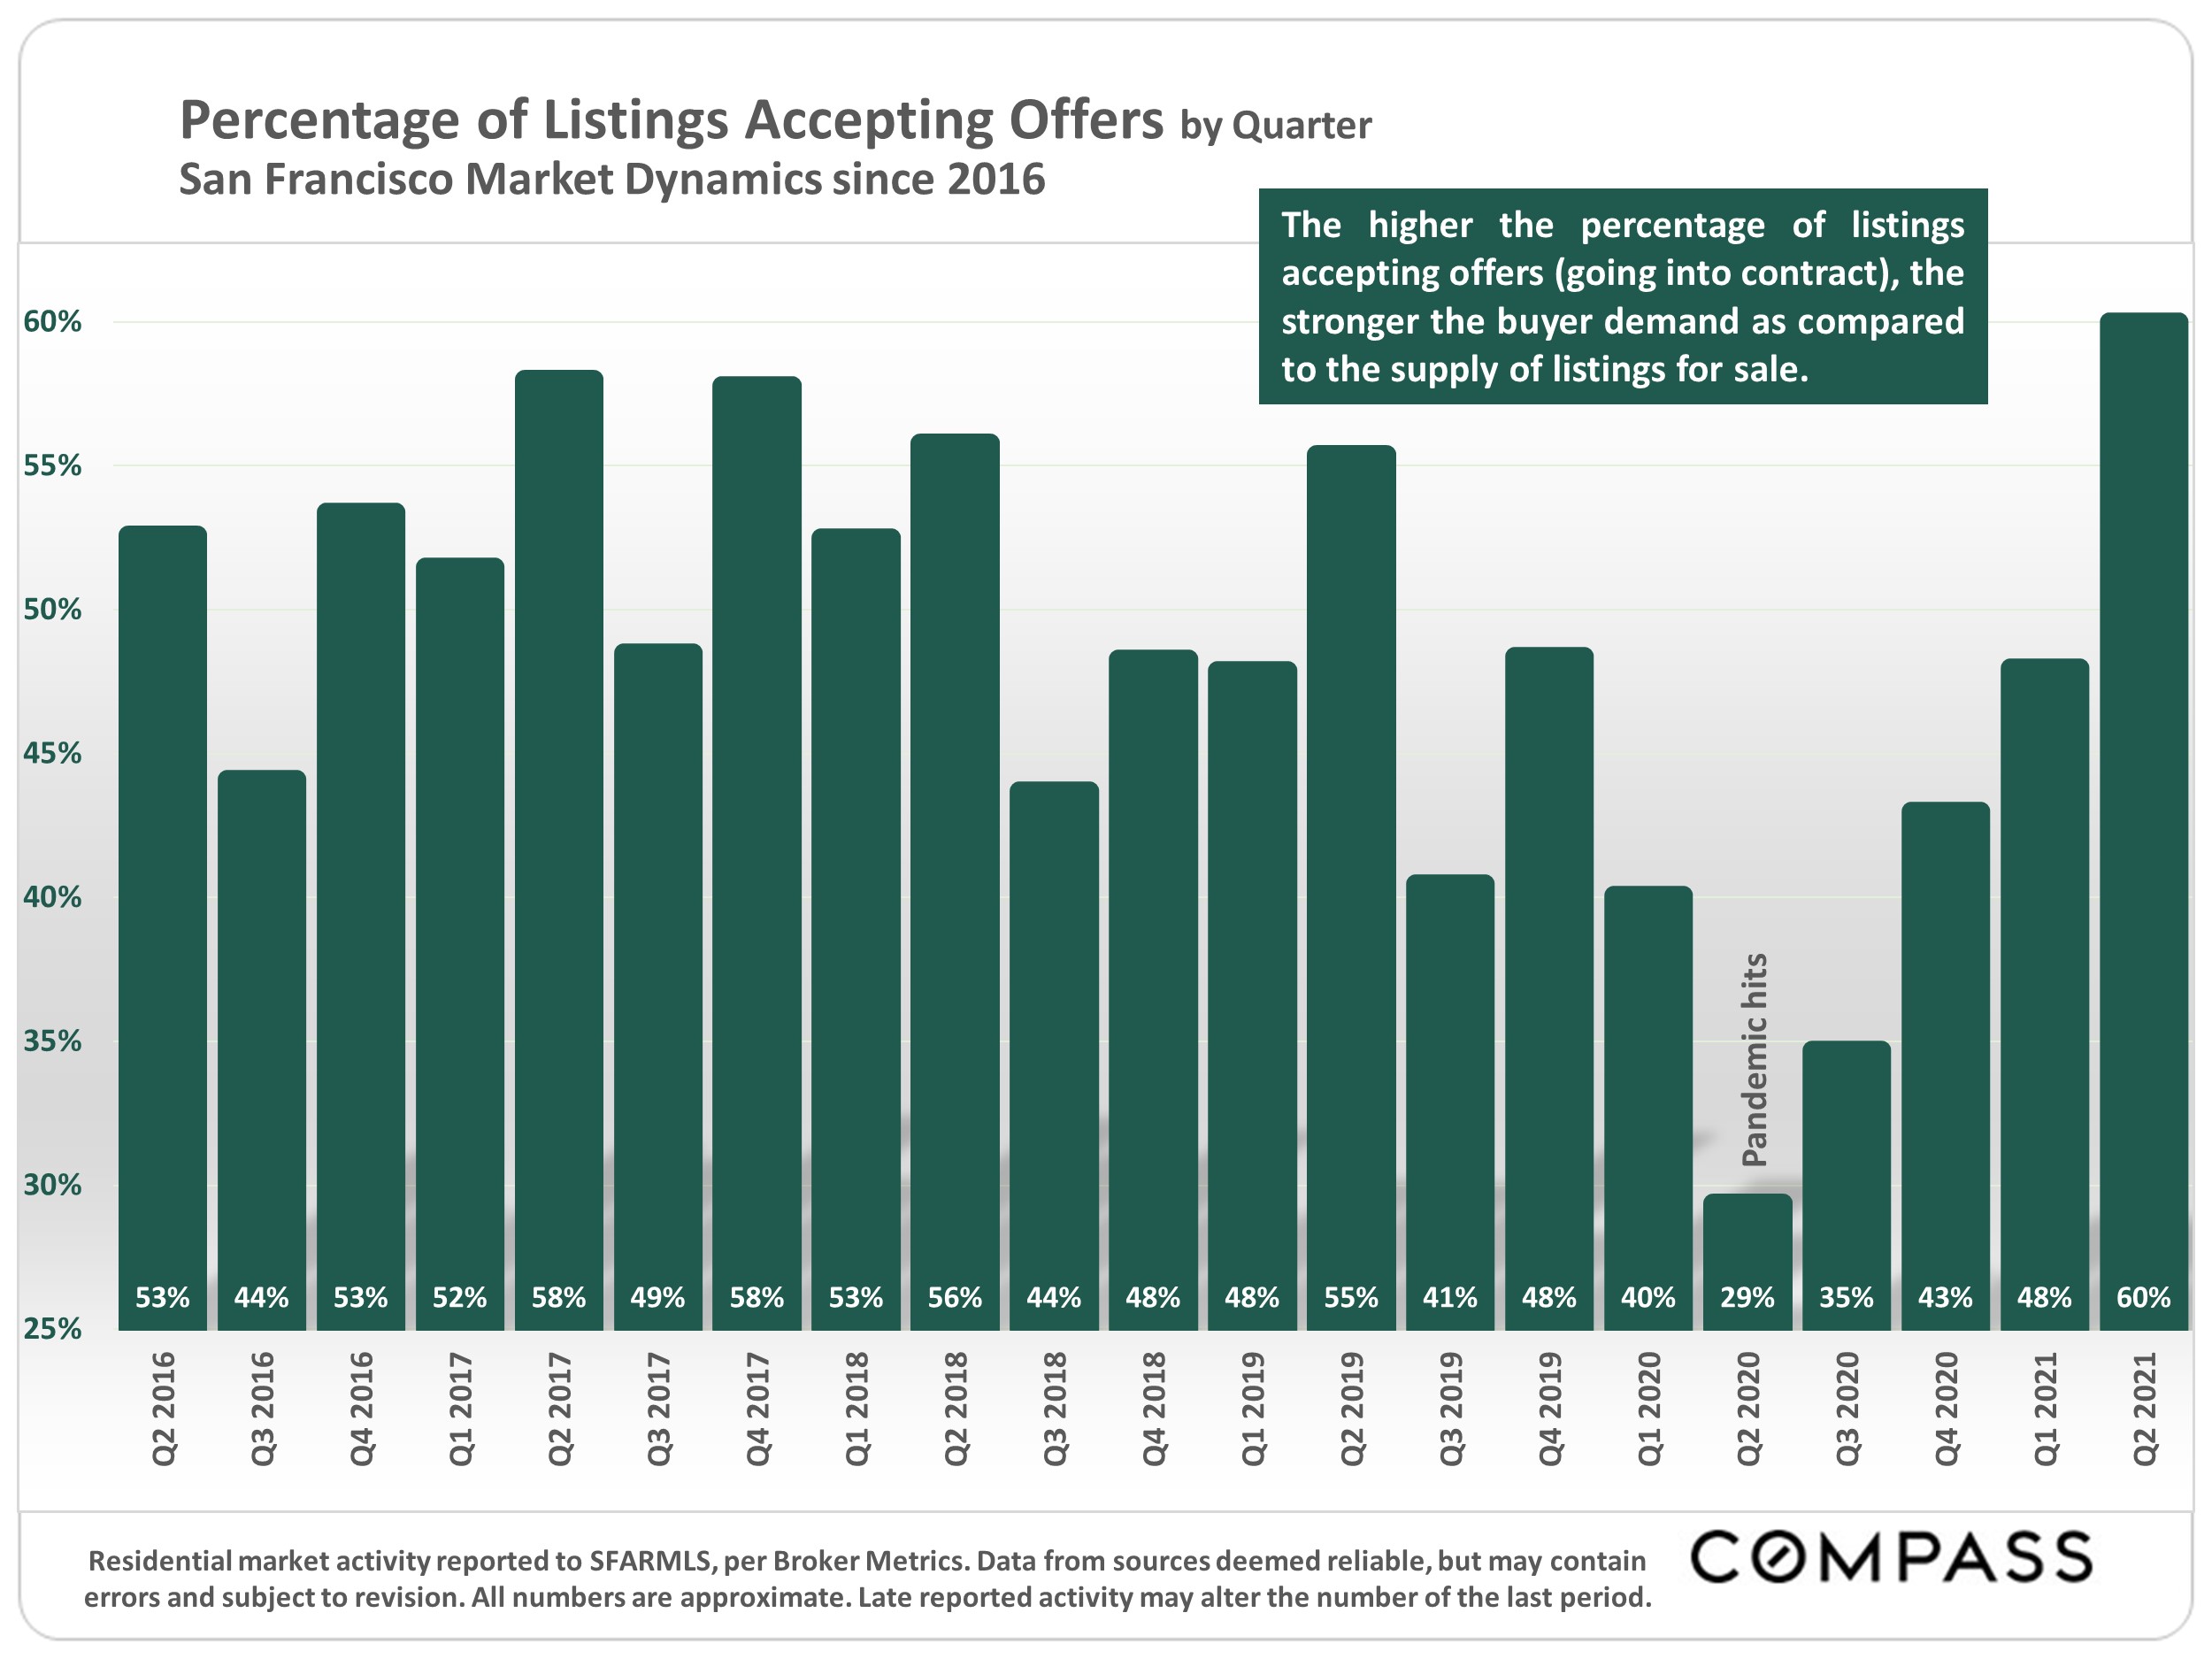 Graph showing Percentage of listings accepting offers by quarter, San Francisco Market Dynamics since Q2 2016 to Q2 2021